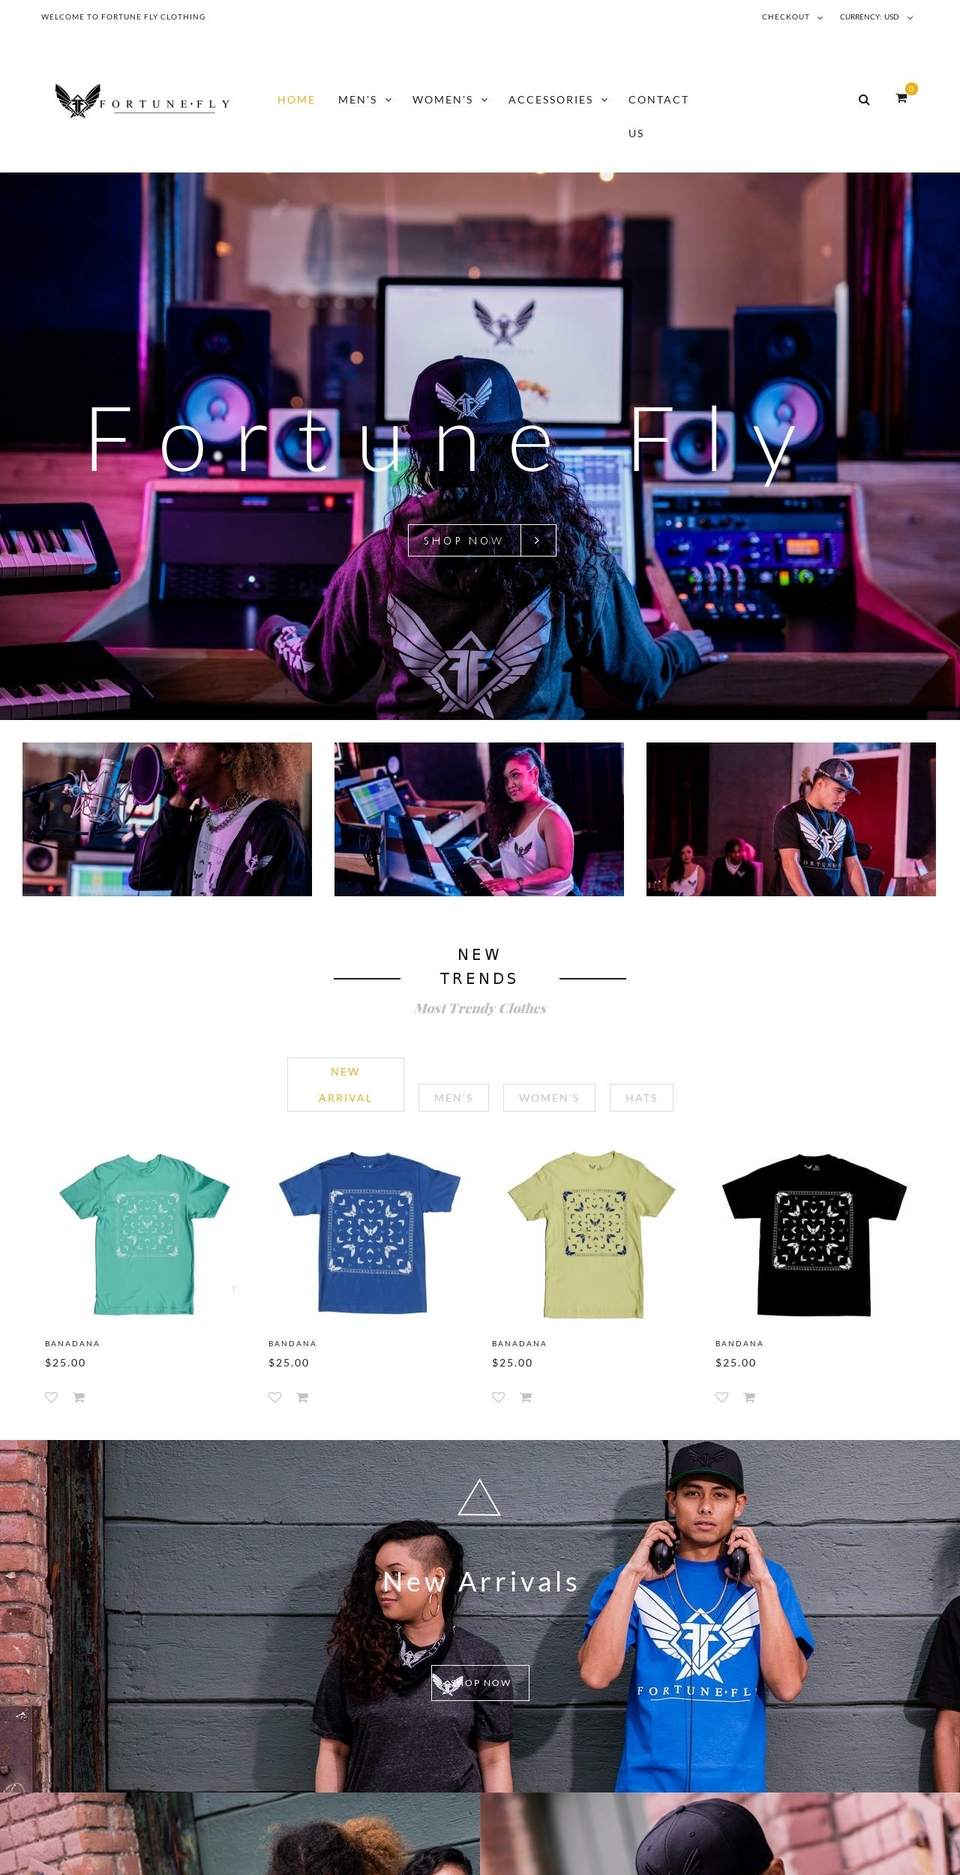 Bazien Shopify theme site example fortuneflyclothing.com